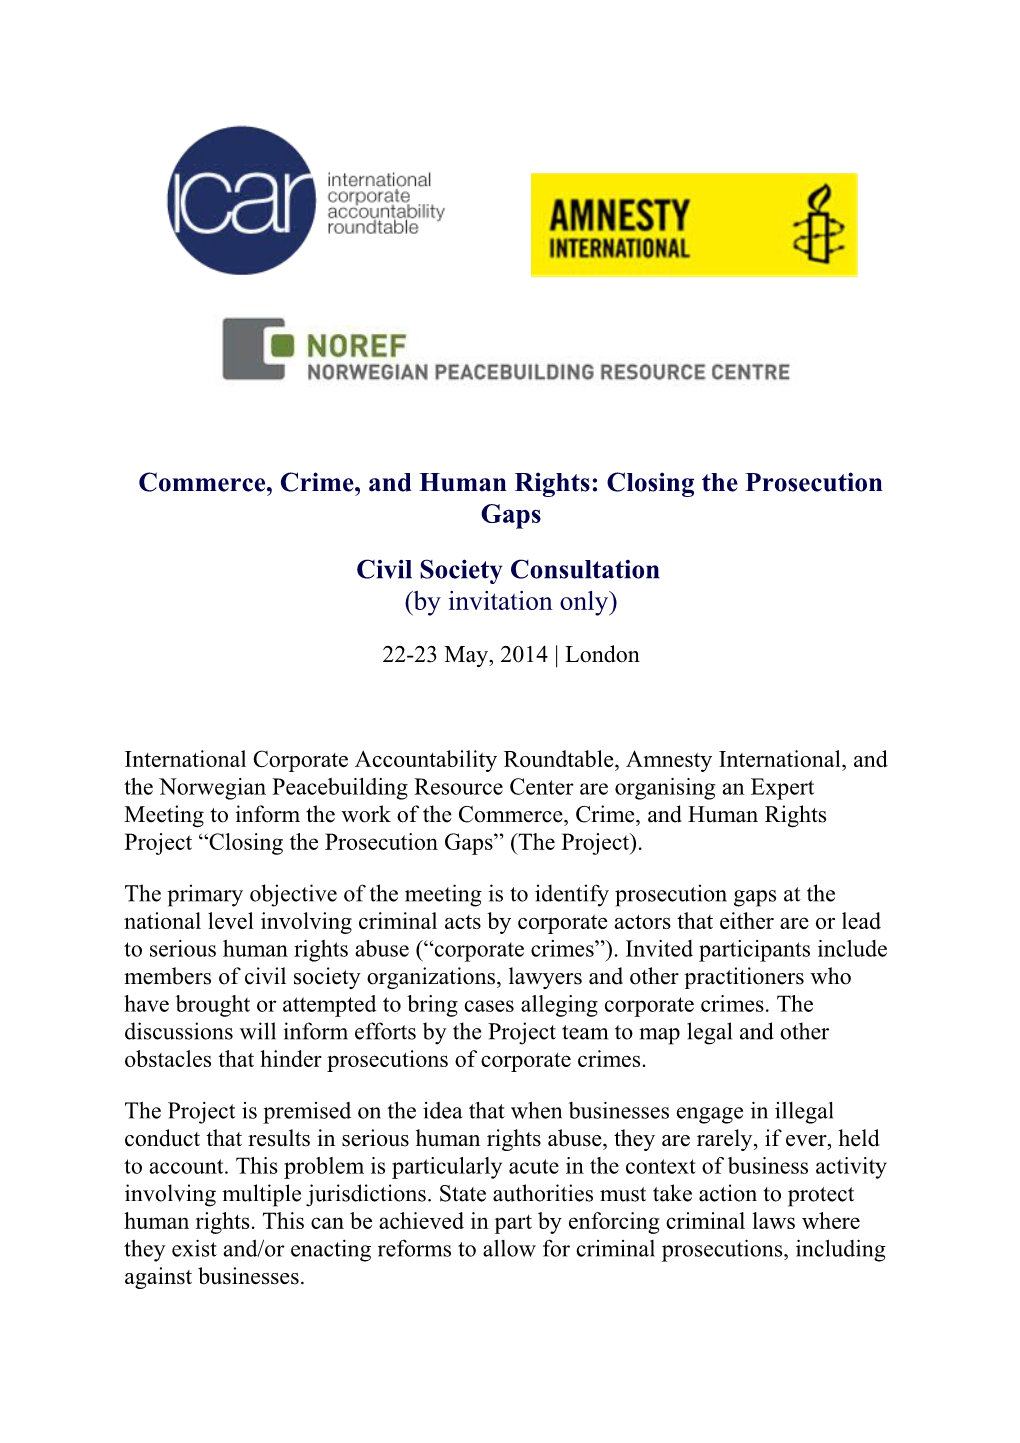 Commerce, Crime, and Human Rights: Closing the Prosecution Gaps